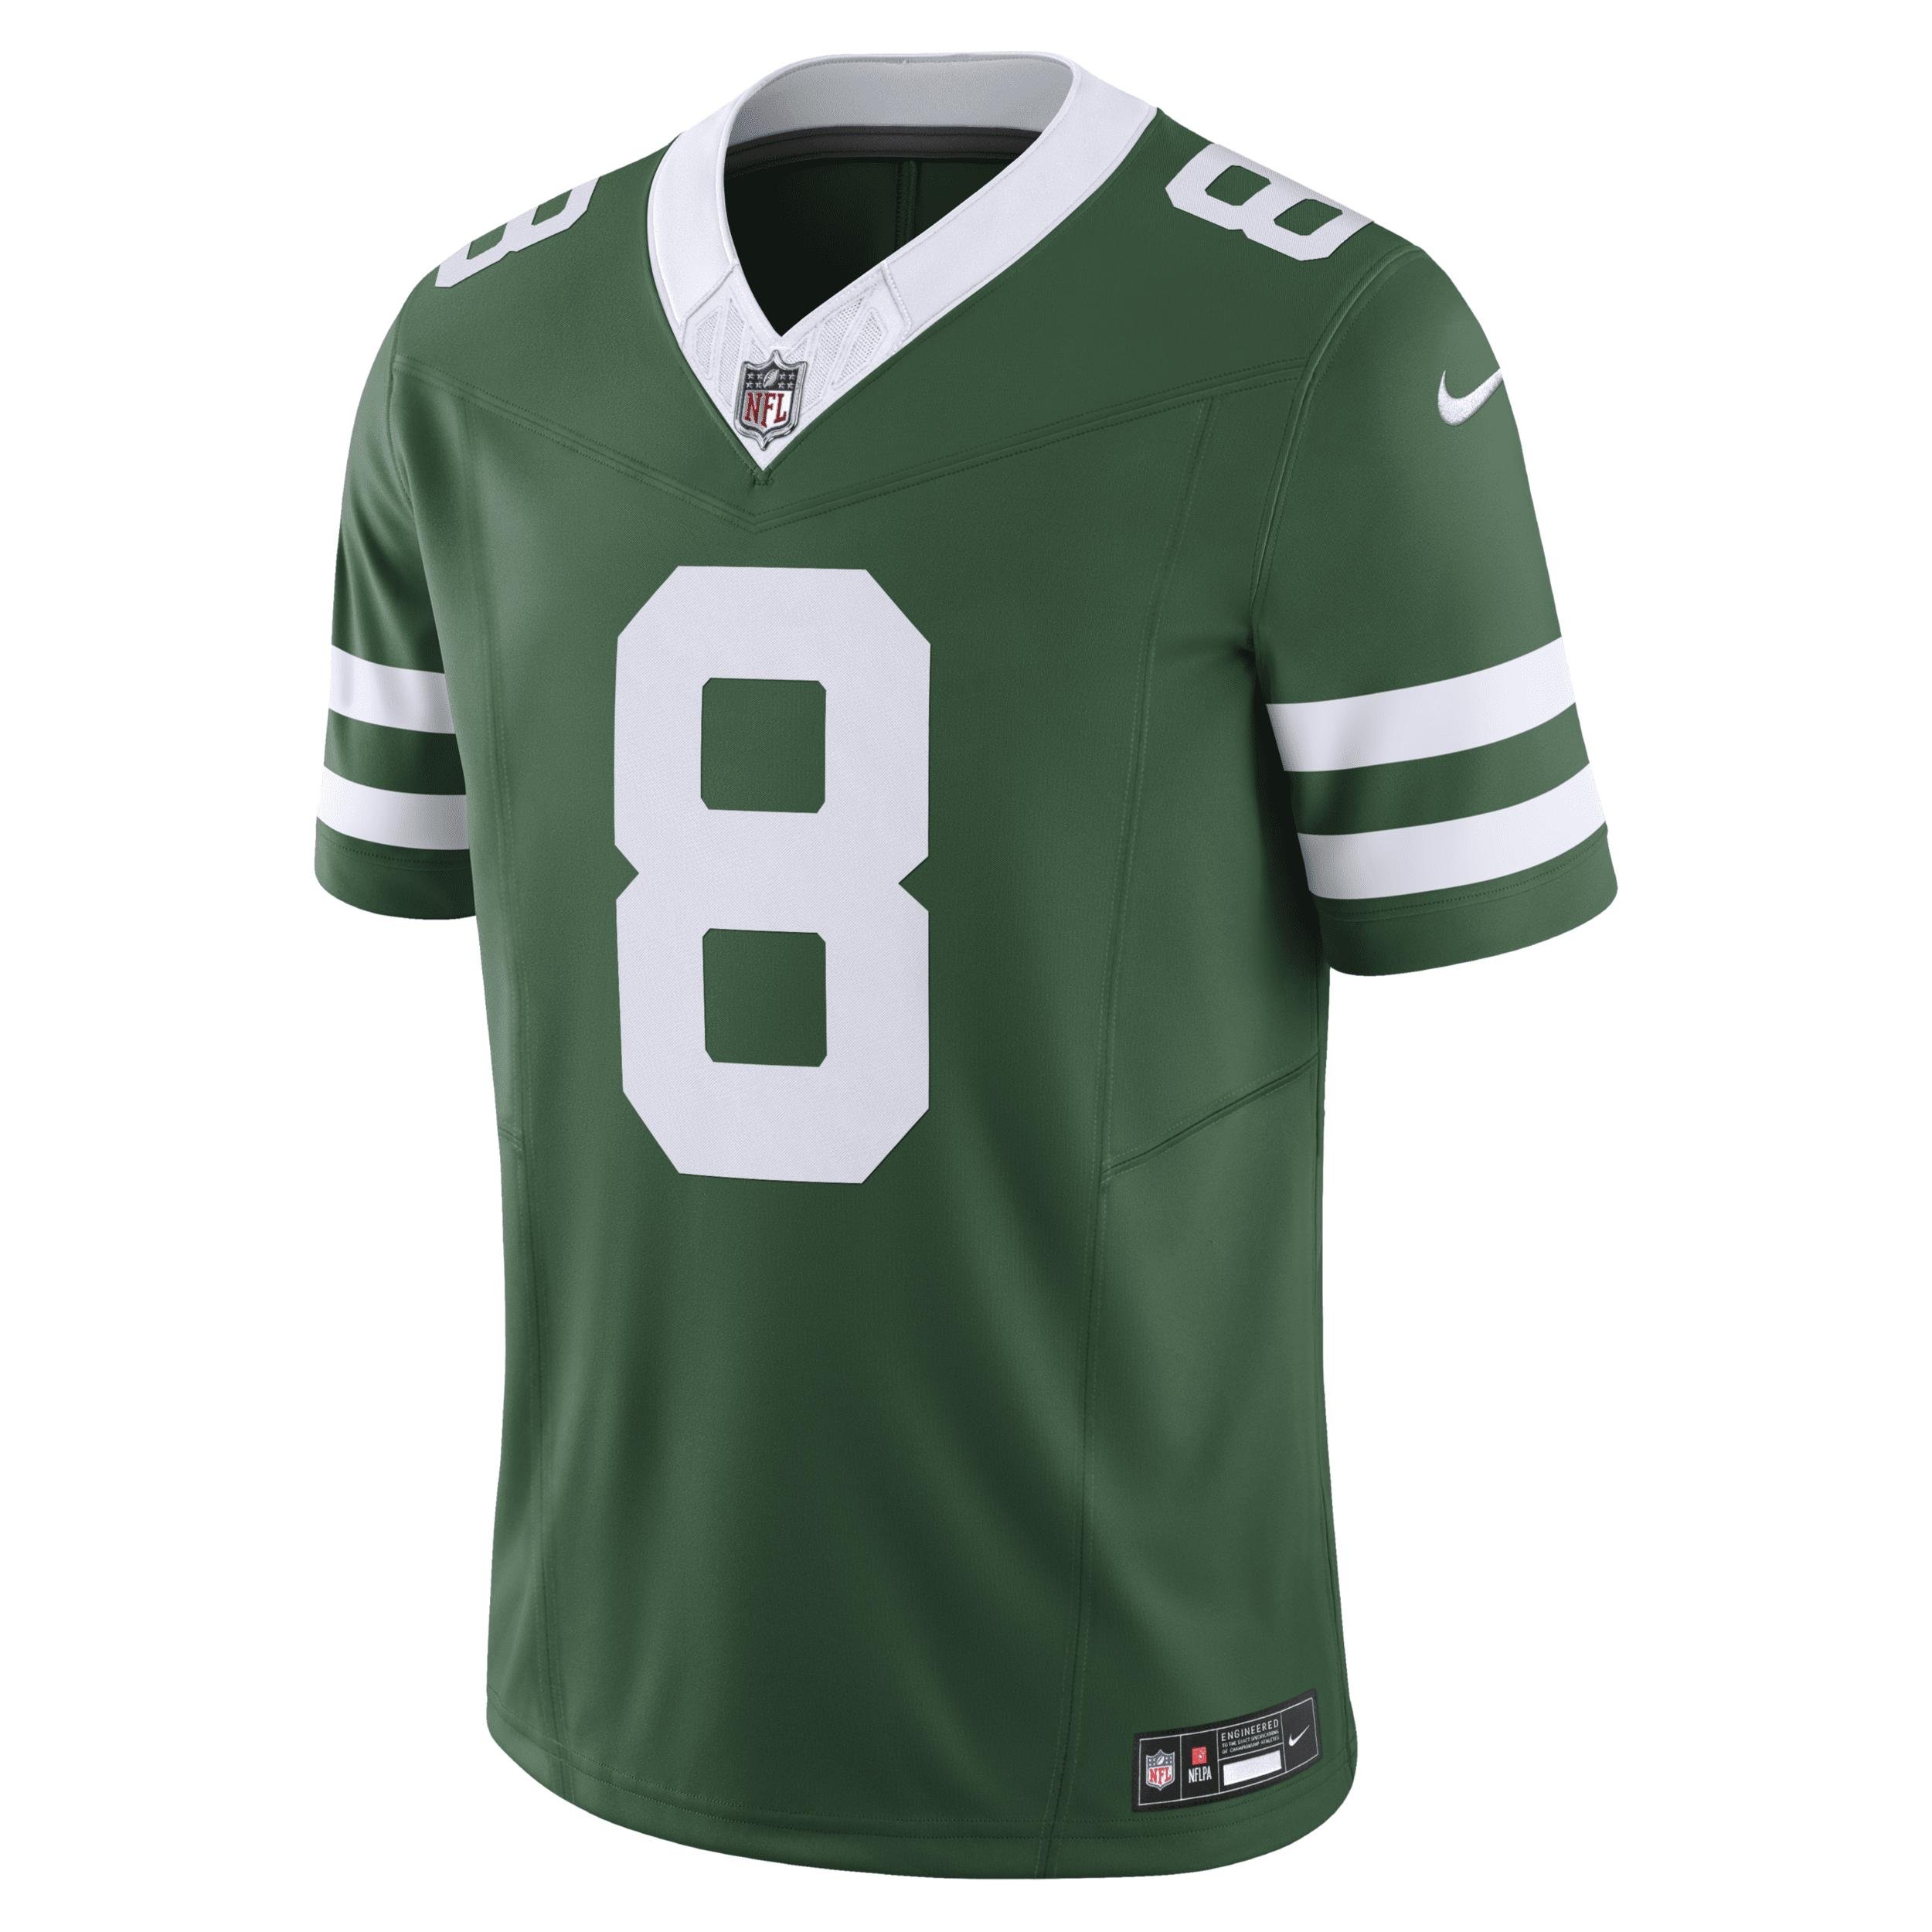 Aaron Rodgers New York Jets Nike Men's Dri-FIT NFL Limited Football Jersey by NIKE